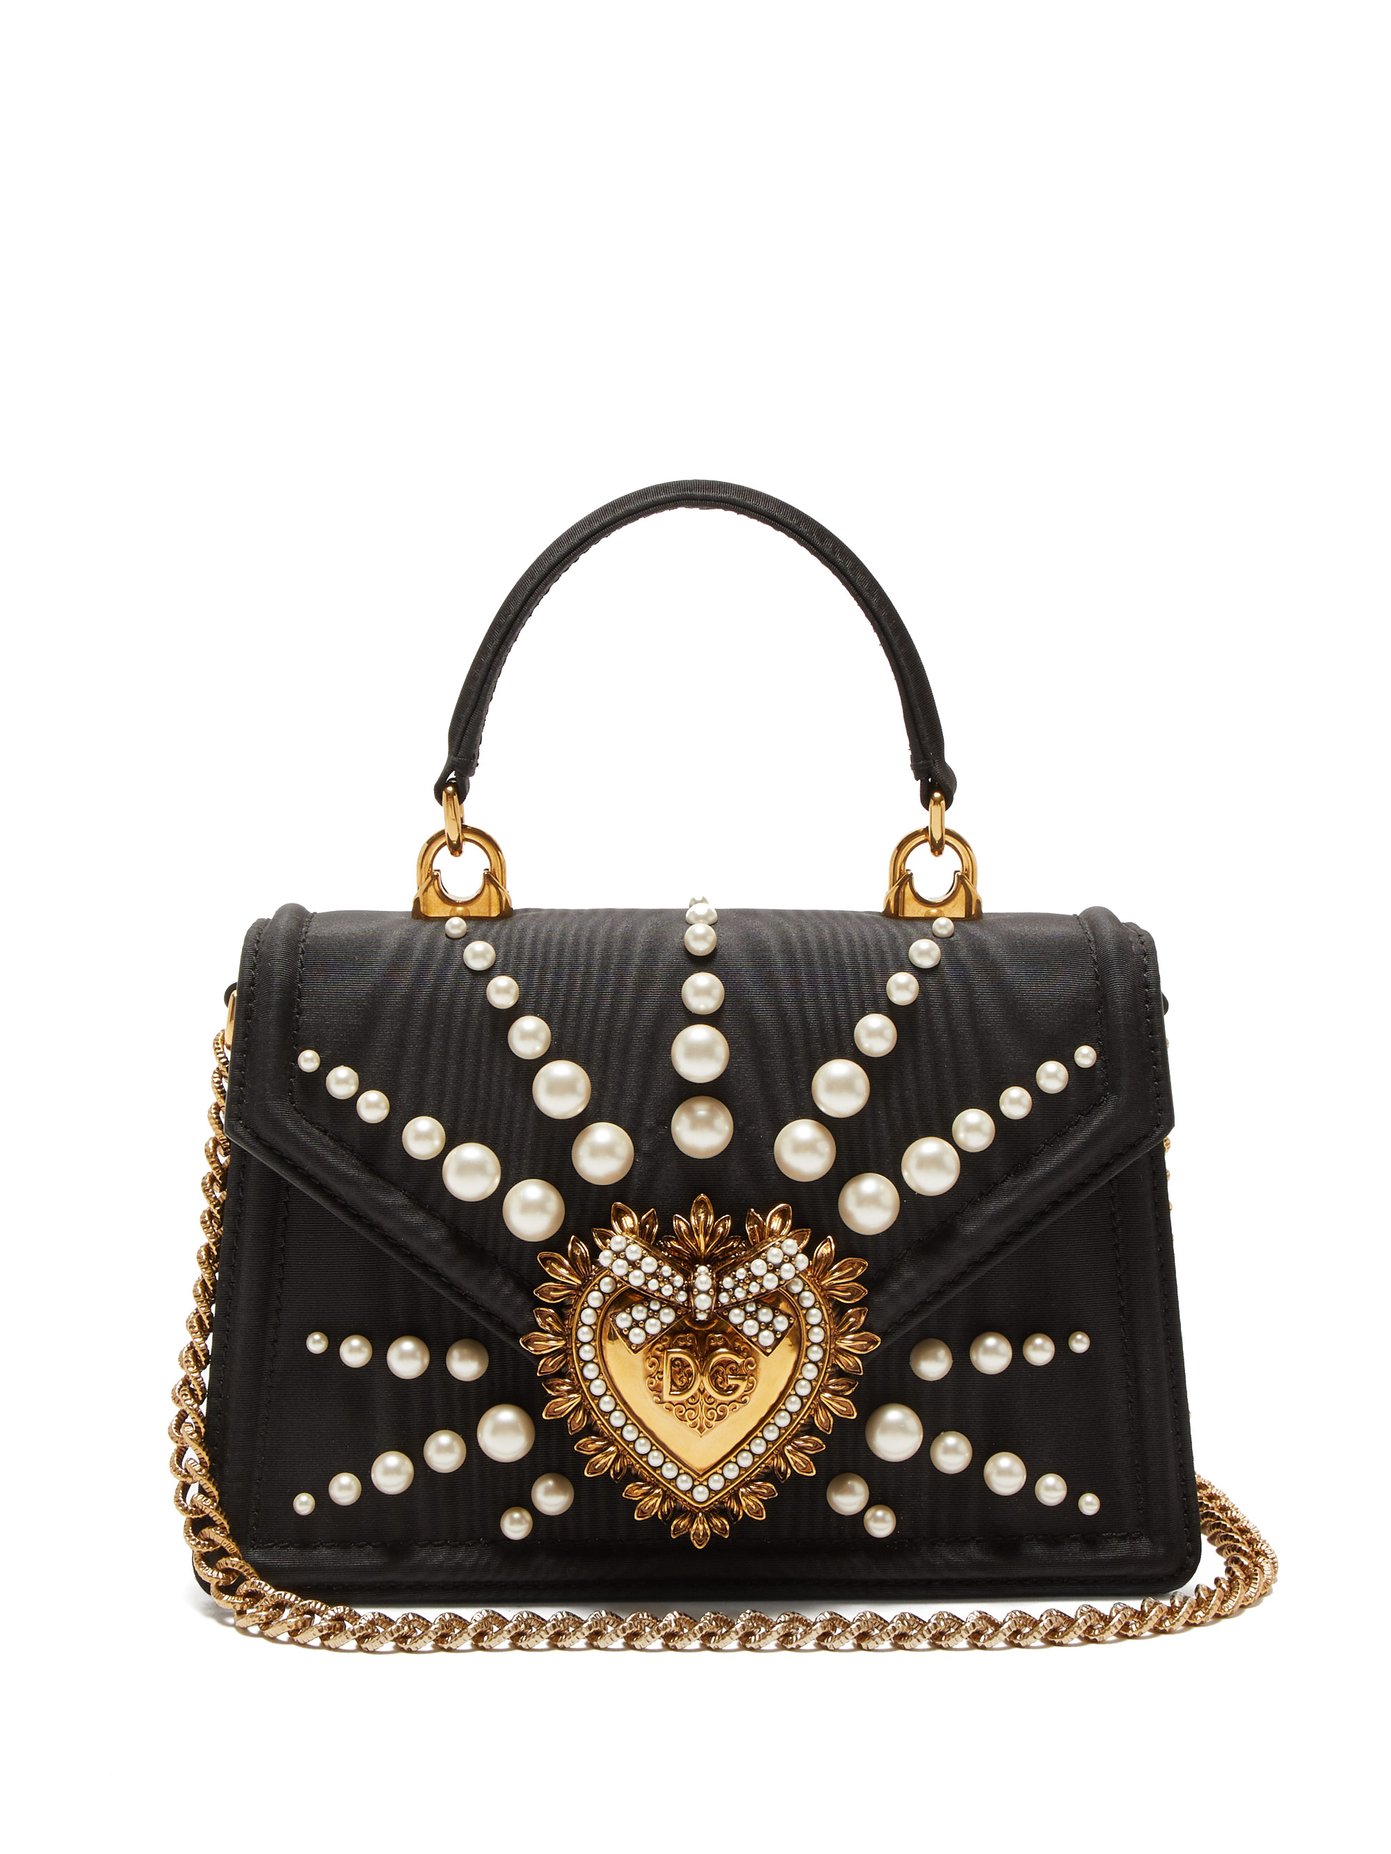 dolce and gabbana bags uk